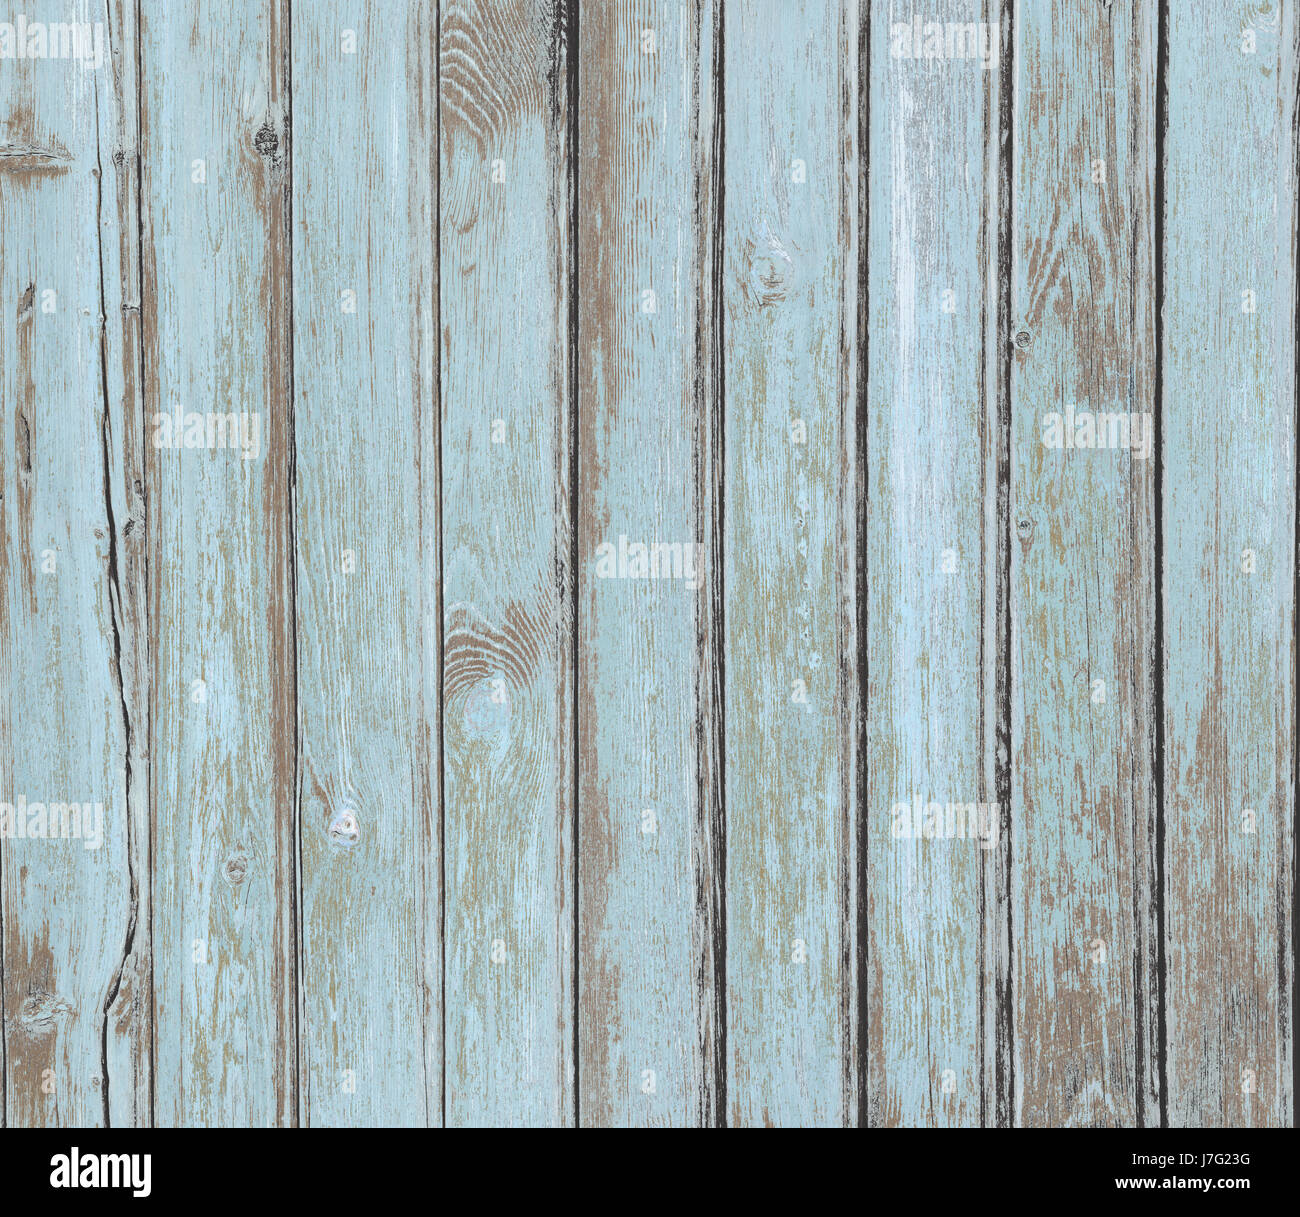 vintage blue wood planks texture or background Stock Photo